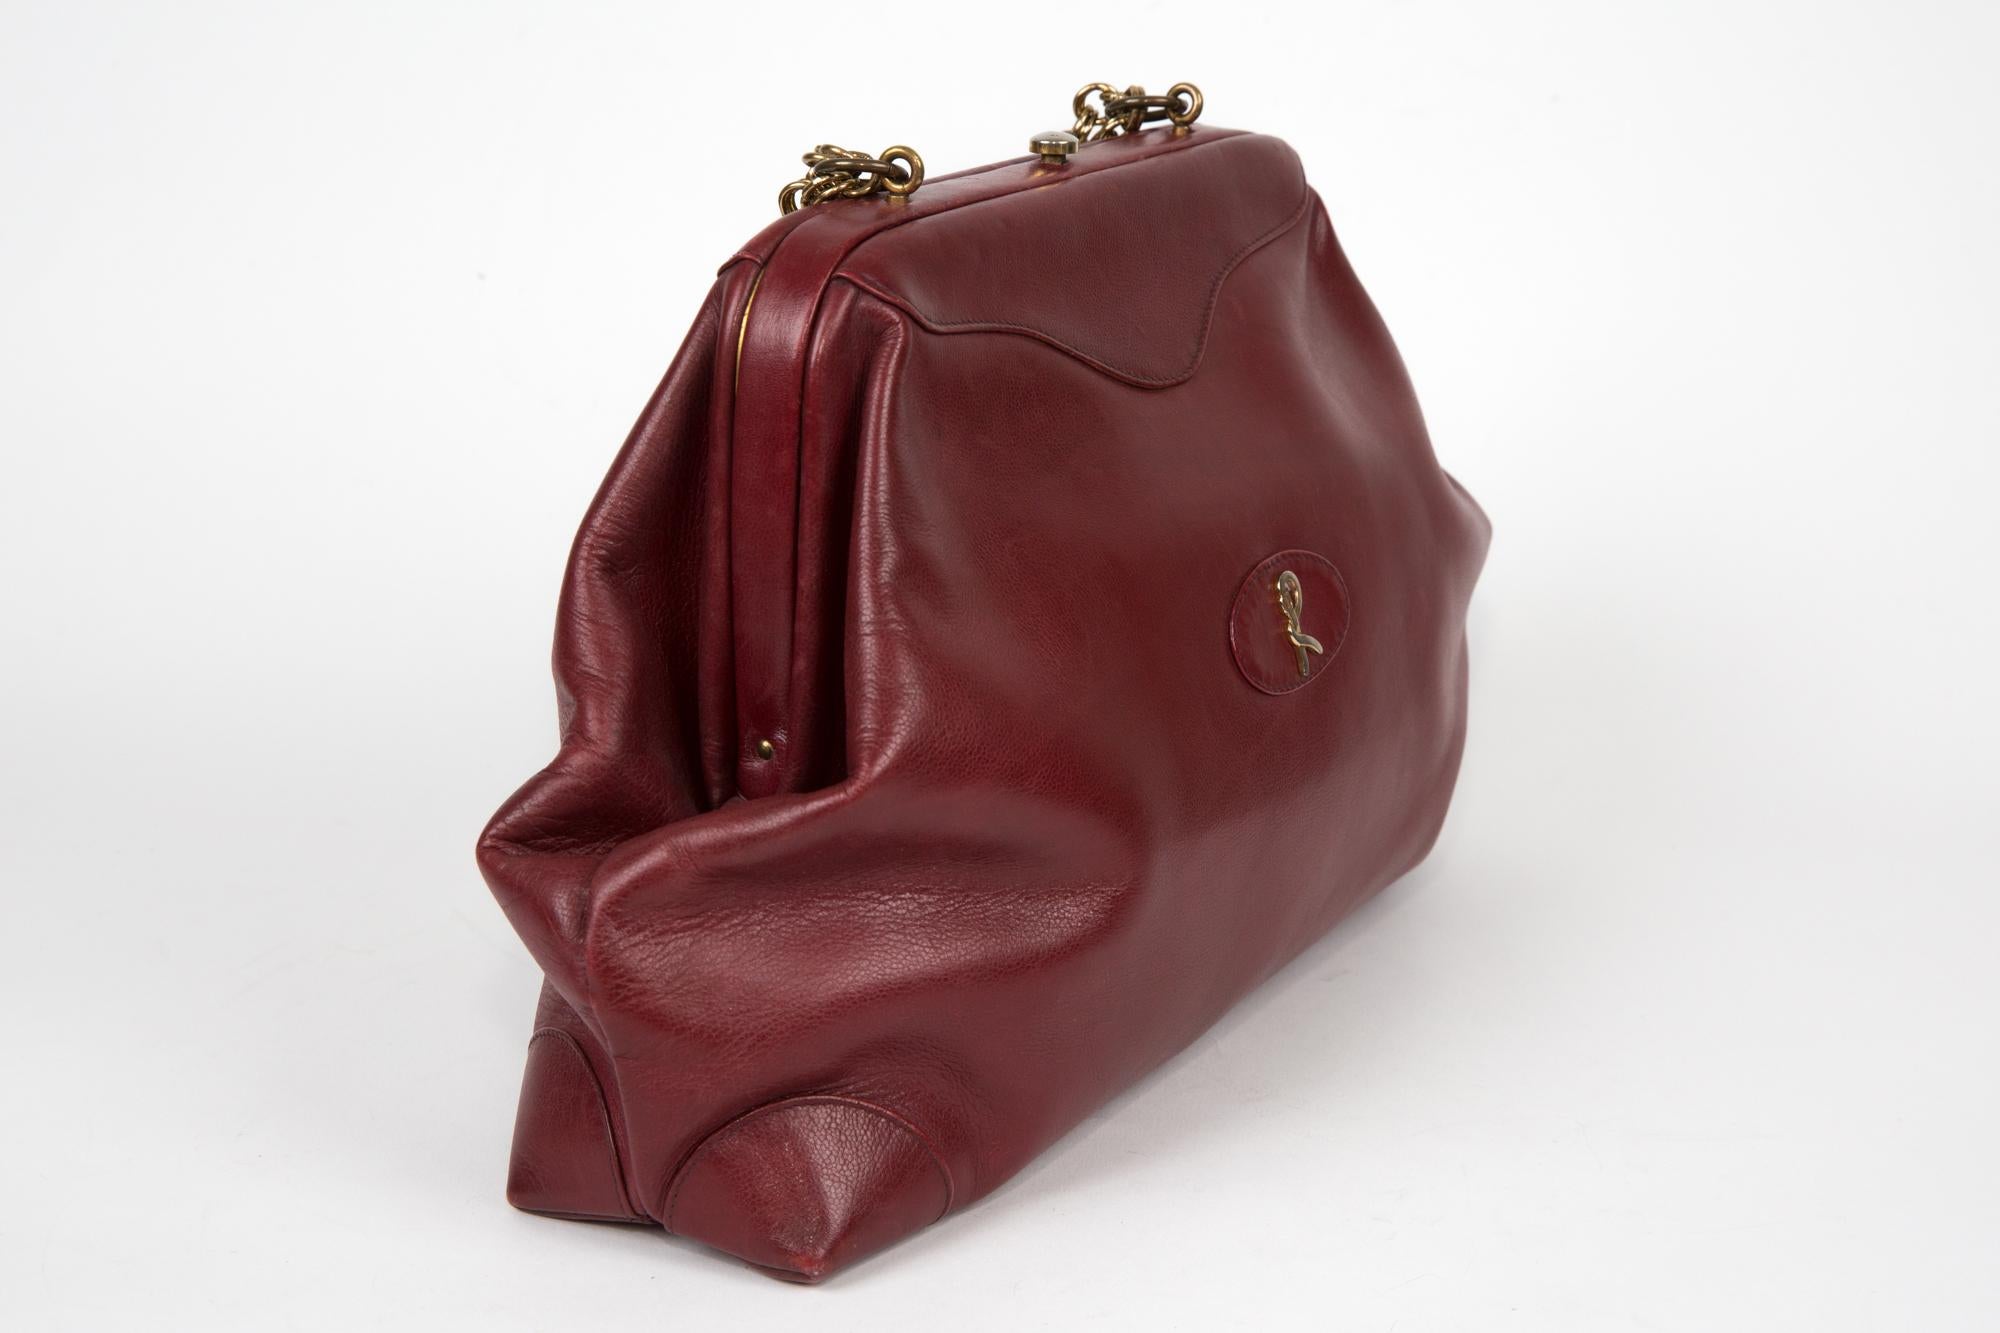 Roberta Di Camerino bordeaux leather doctor handbag featuring a top clasp opening, a gold tone adorned front logo 